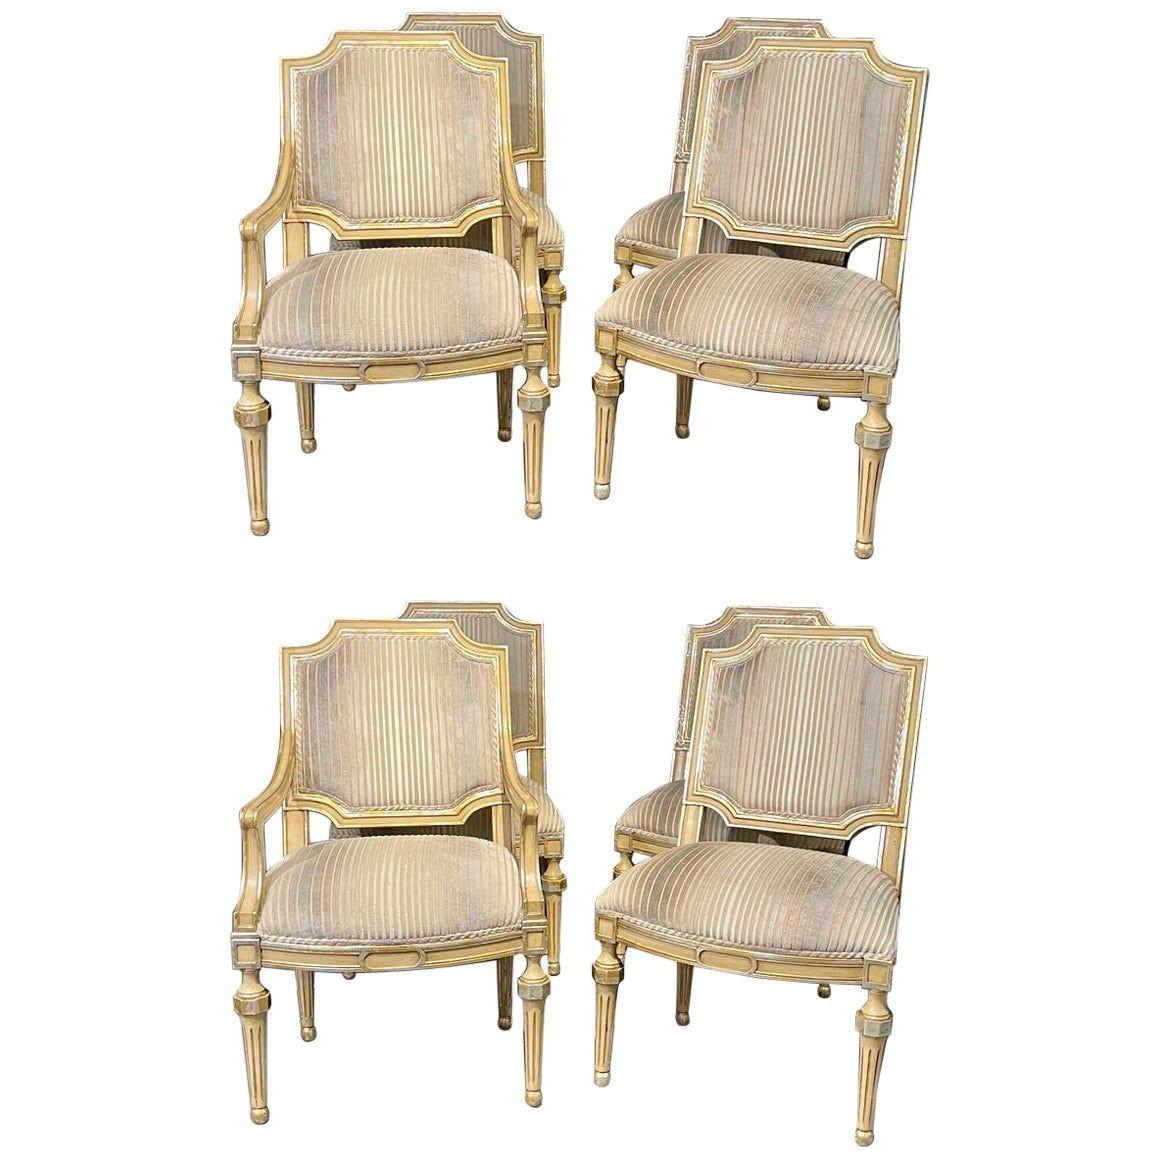 Hollywood Regency Set of Eight Louis XVI Style Dining Chairs Painted and Parcel-Gilt, Jansen Style